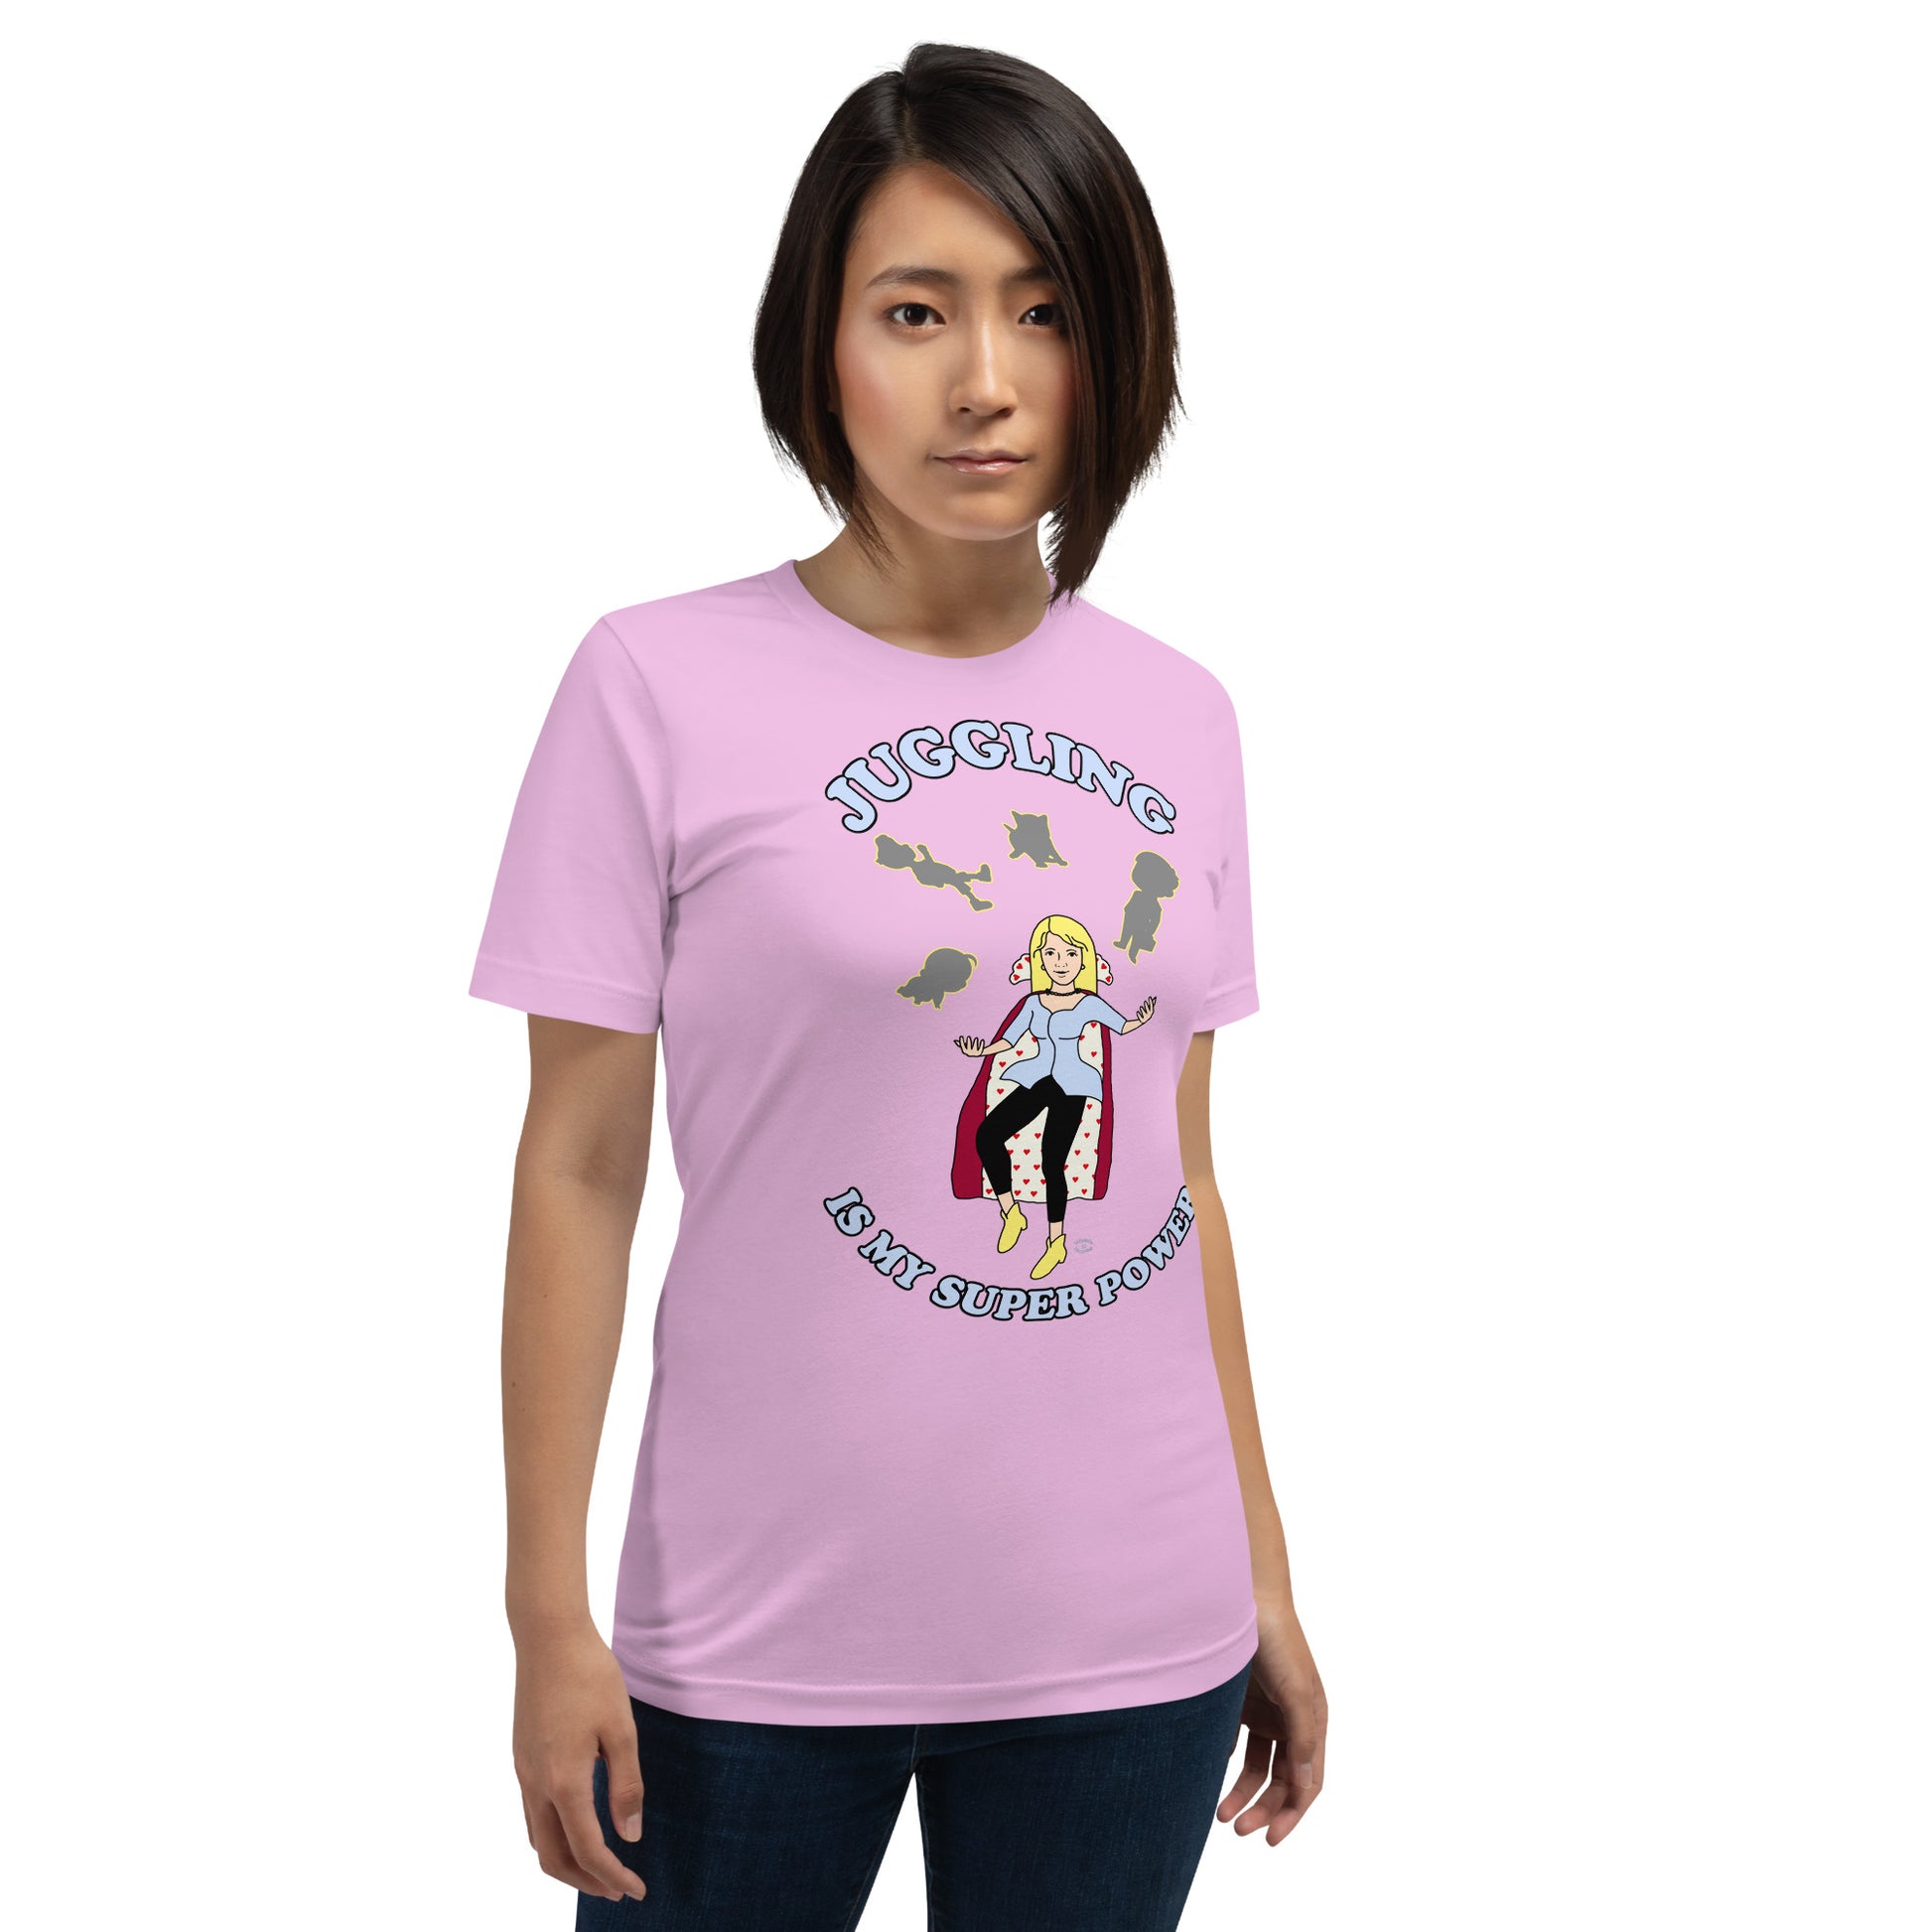 A women wearing a unisex short sleeve tshirt which has on the front a cartoon women in a cape juggling her family like a jester and the text Juggling Is My Super Power - front - lilac